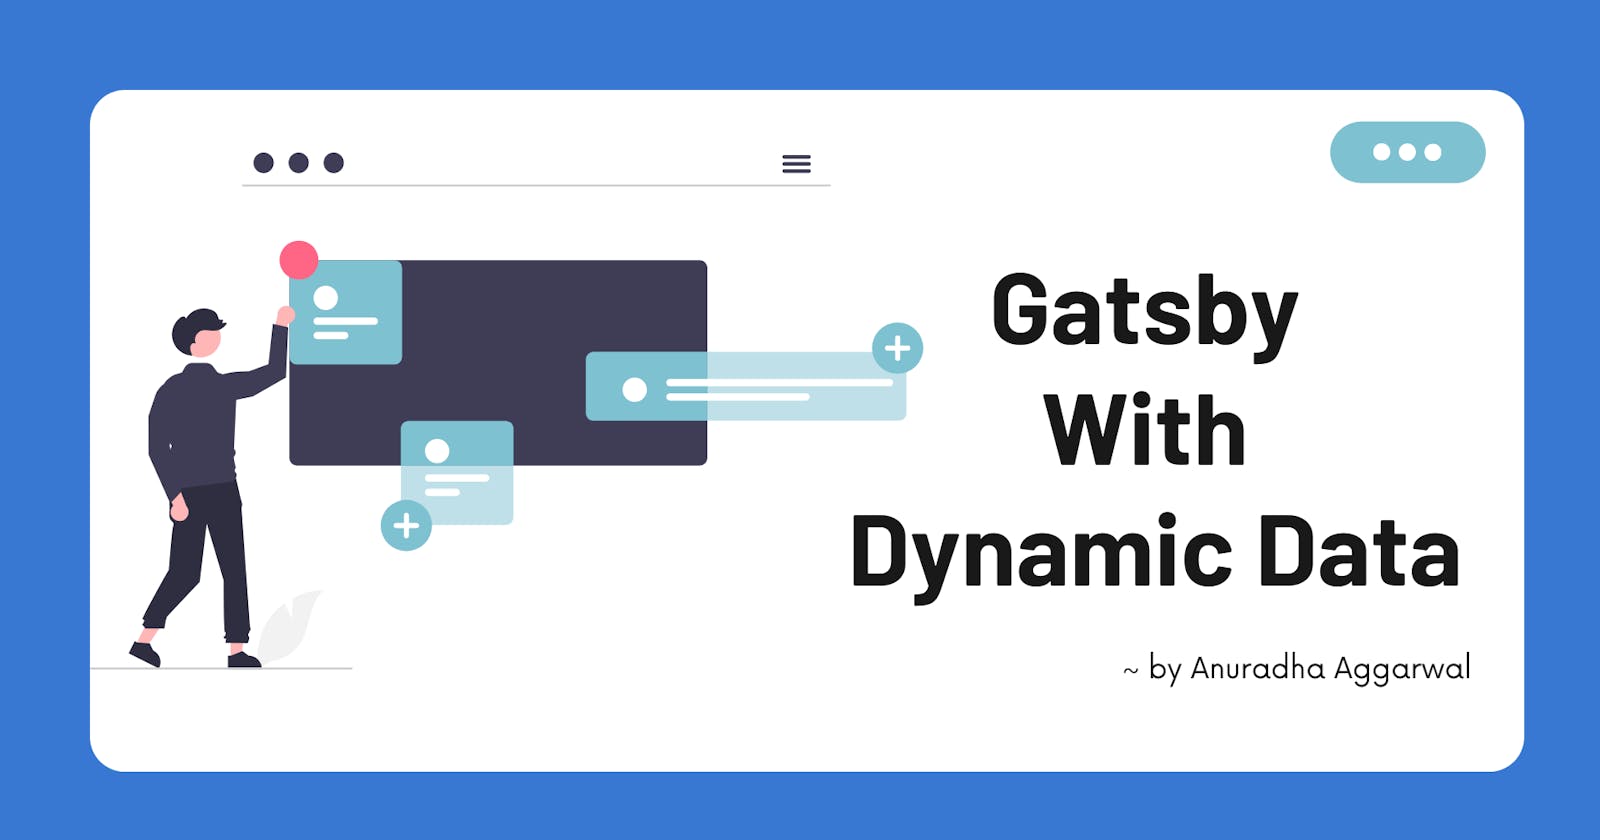 How to create dynamic pages in Gatsby from MDX and YAML?